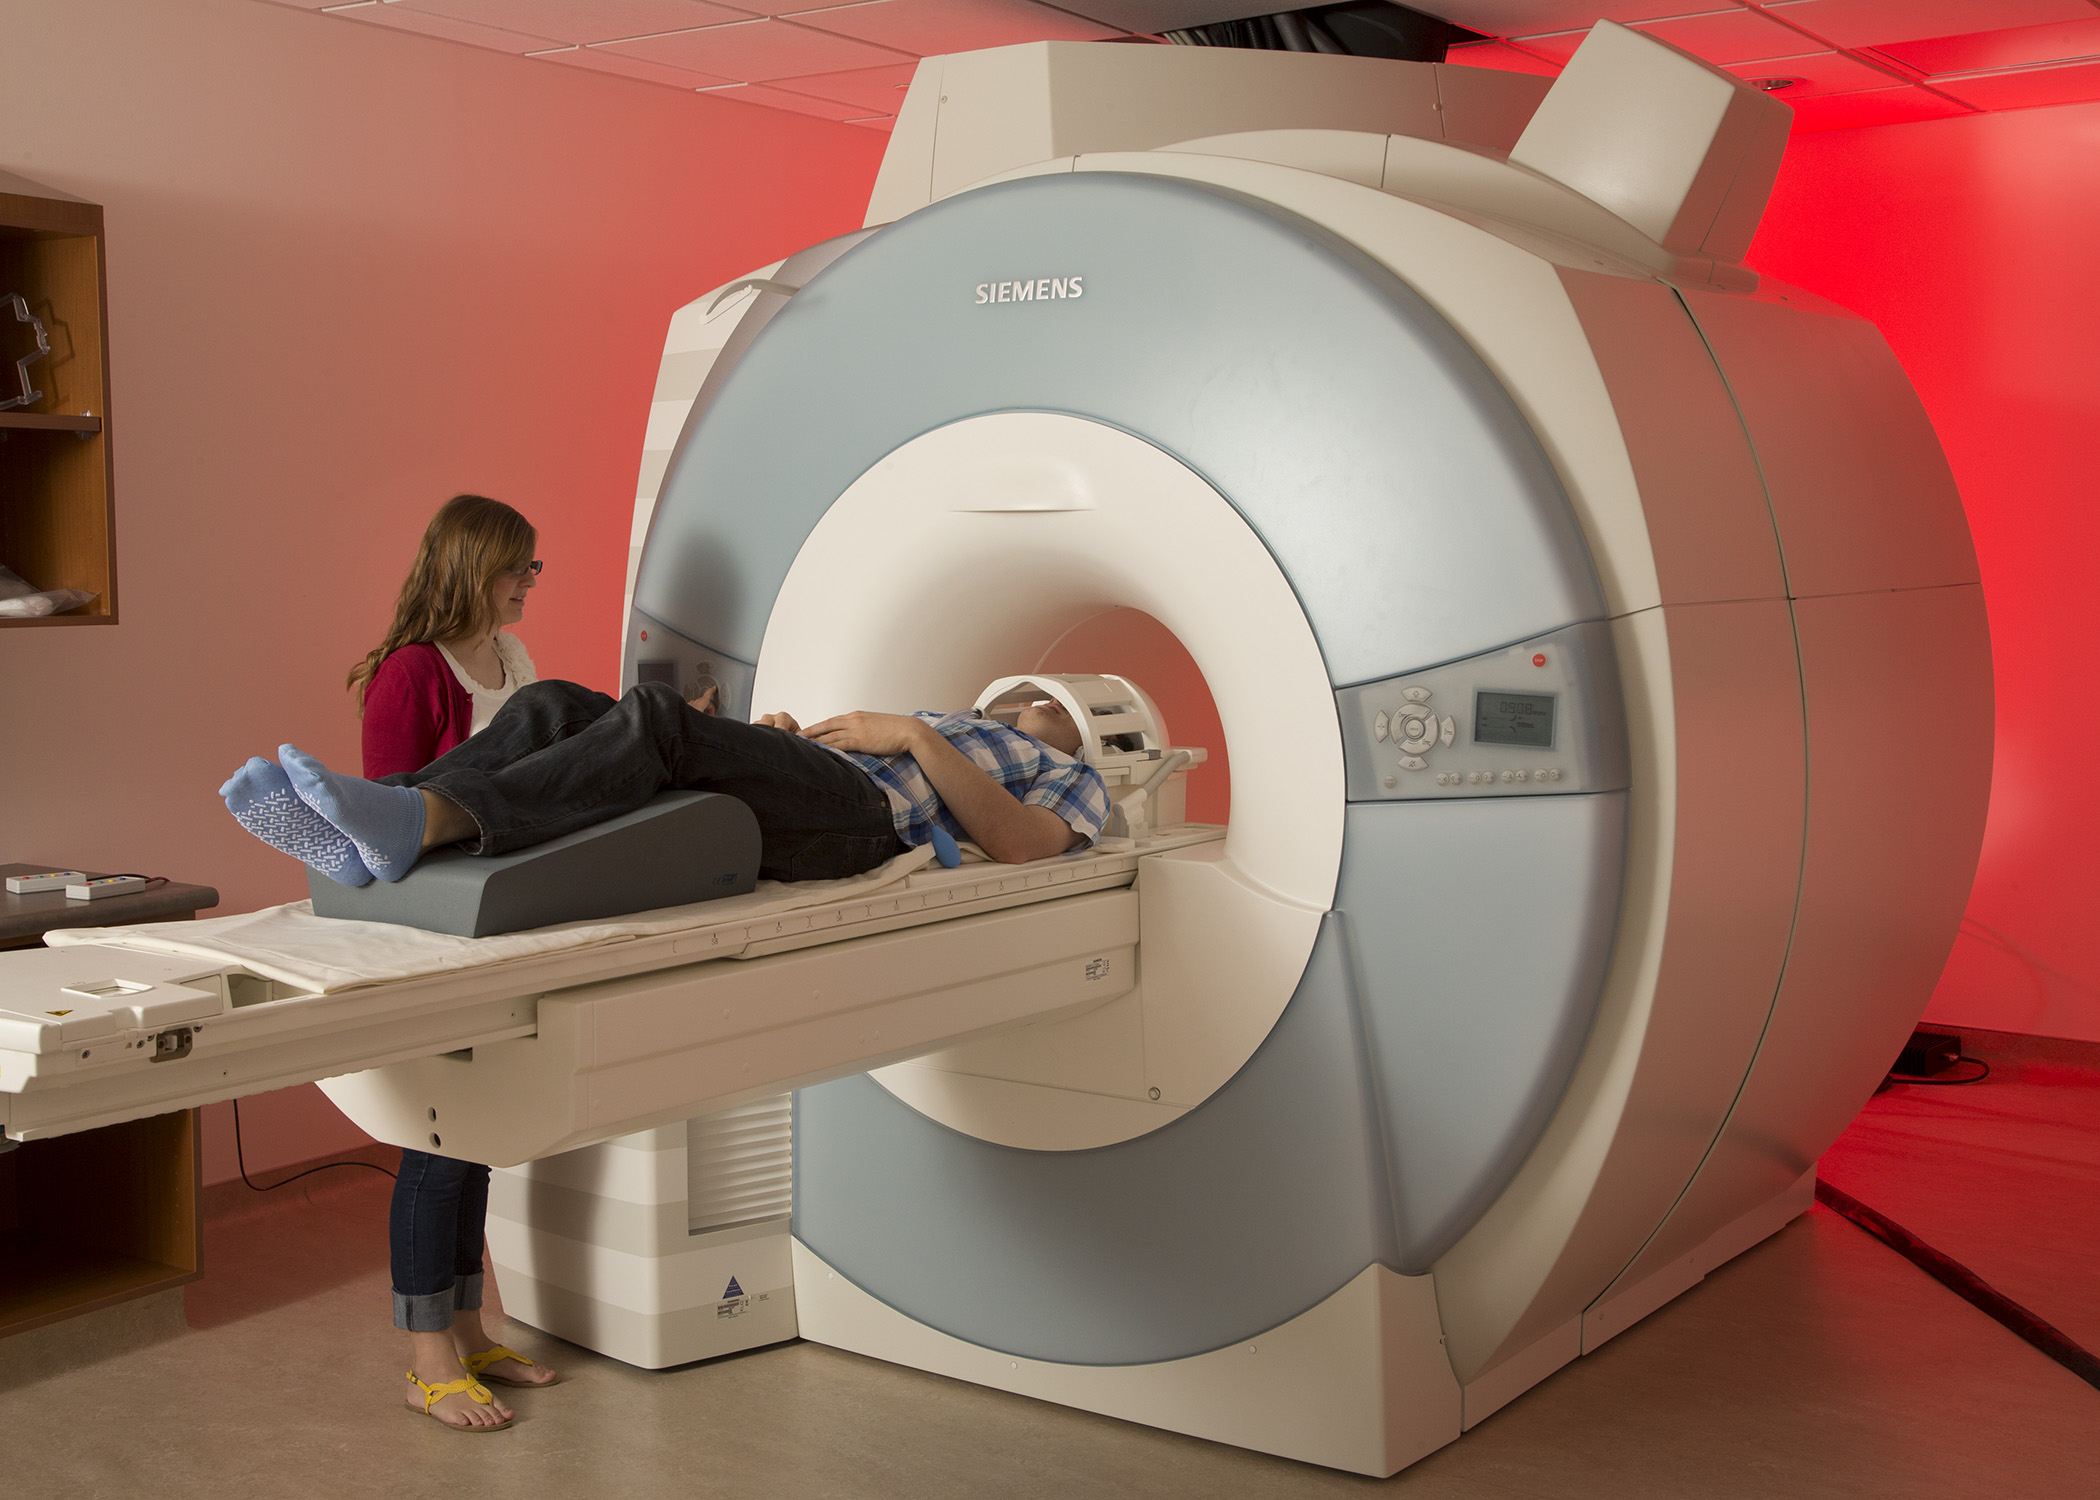 MRI brain scans reveal the way we perceive, or simply ignore, security warnings.